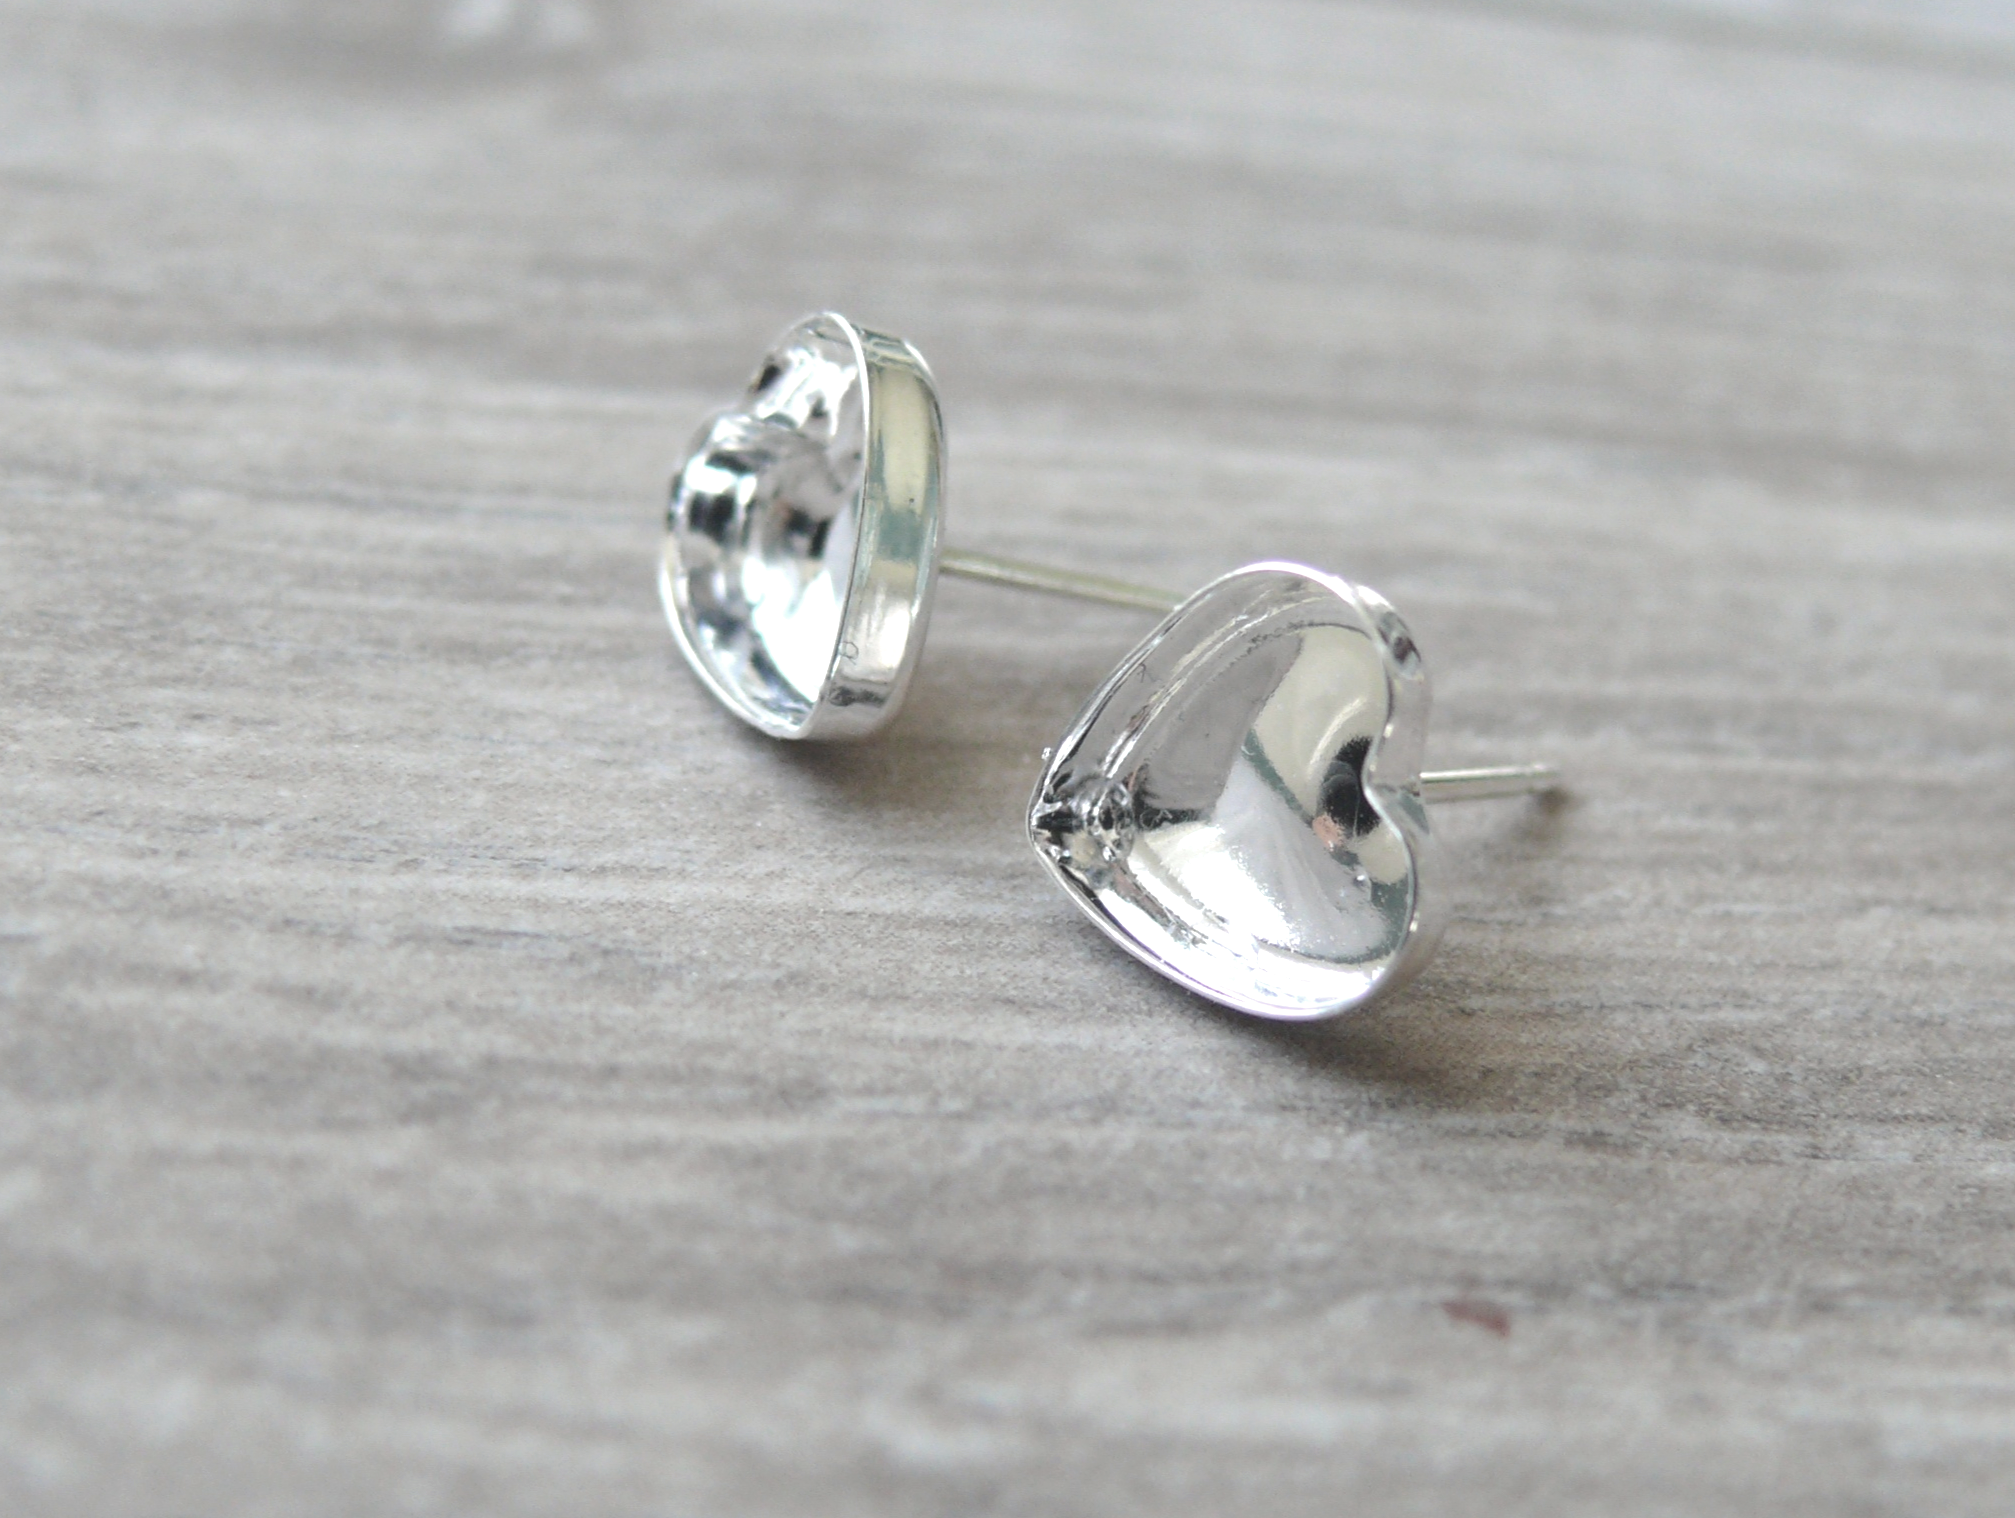 Oval Stud Earring Blanks with Bezel Cups for Resin Jewelry - Supply Diva